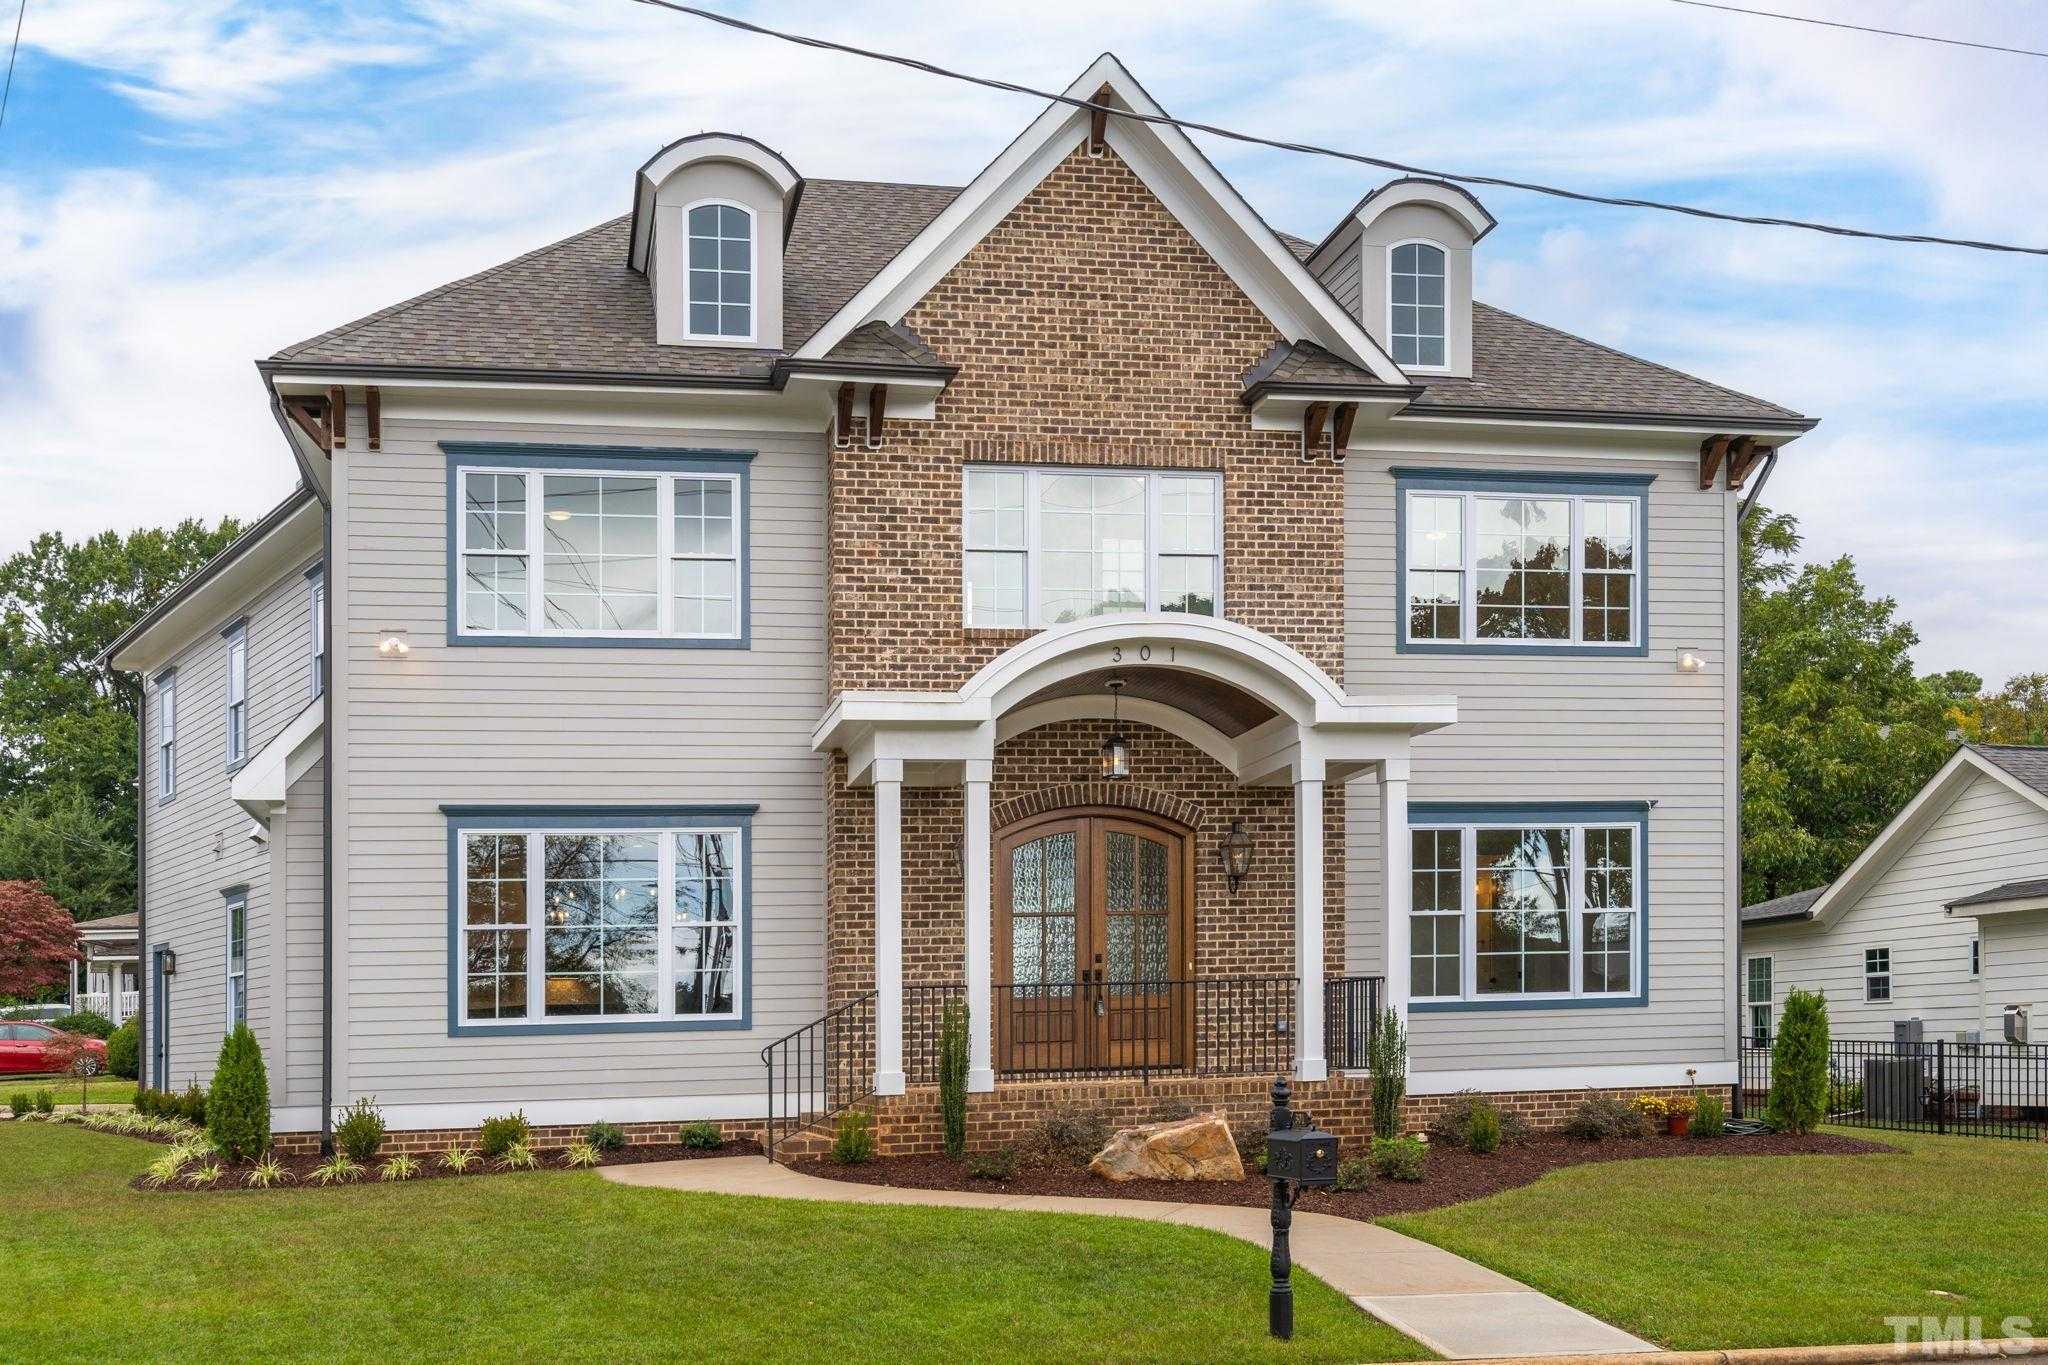 $1,800,000 - 5Br/6Ba -  for Sale in Not In A Subdivision, Raleigh